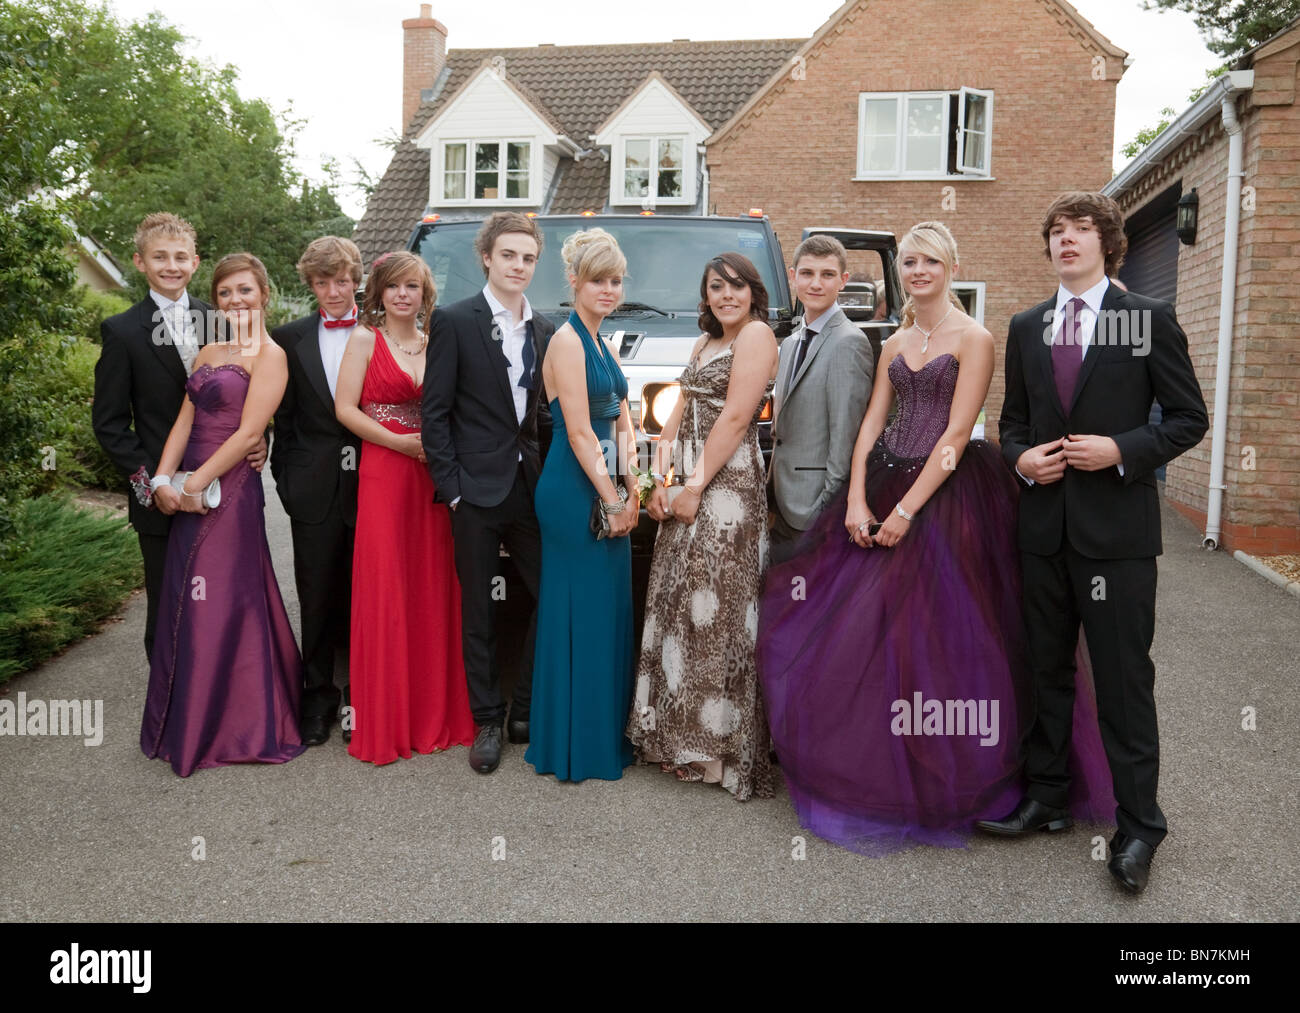 Teenage girls and boys dressed up ready for their school prom pose in front of their limo, Cambridgeshire, UK Stock Photo